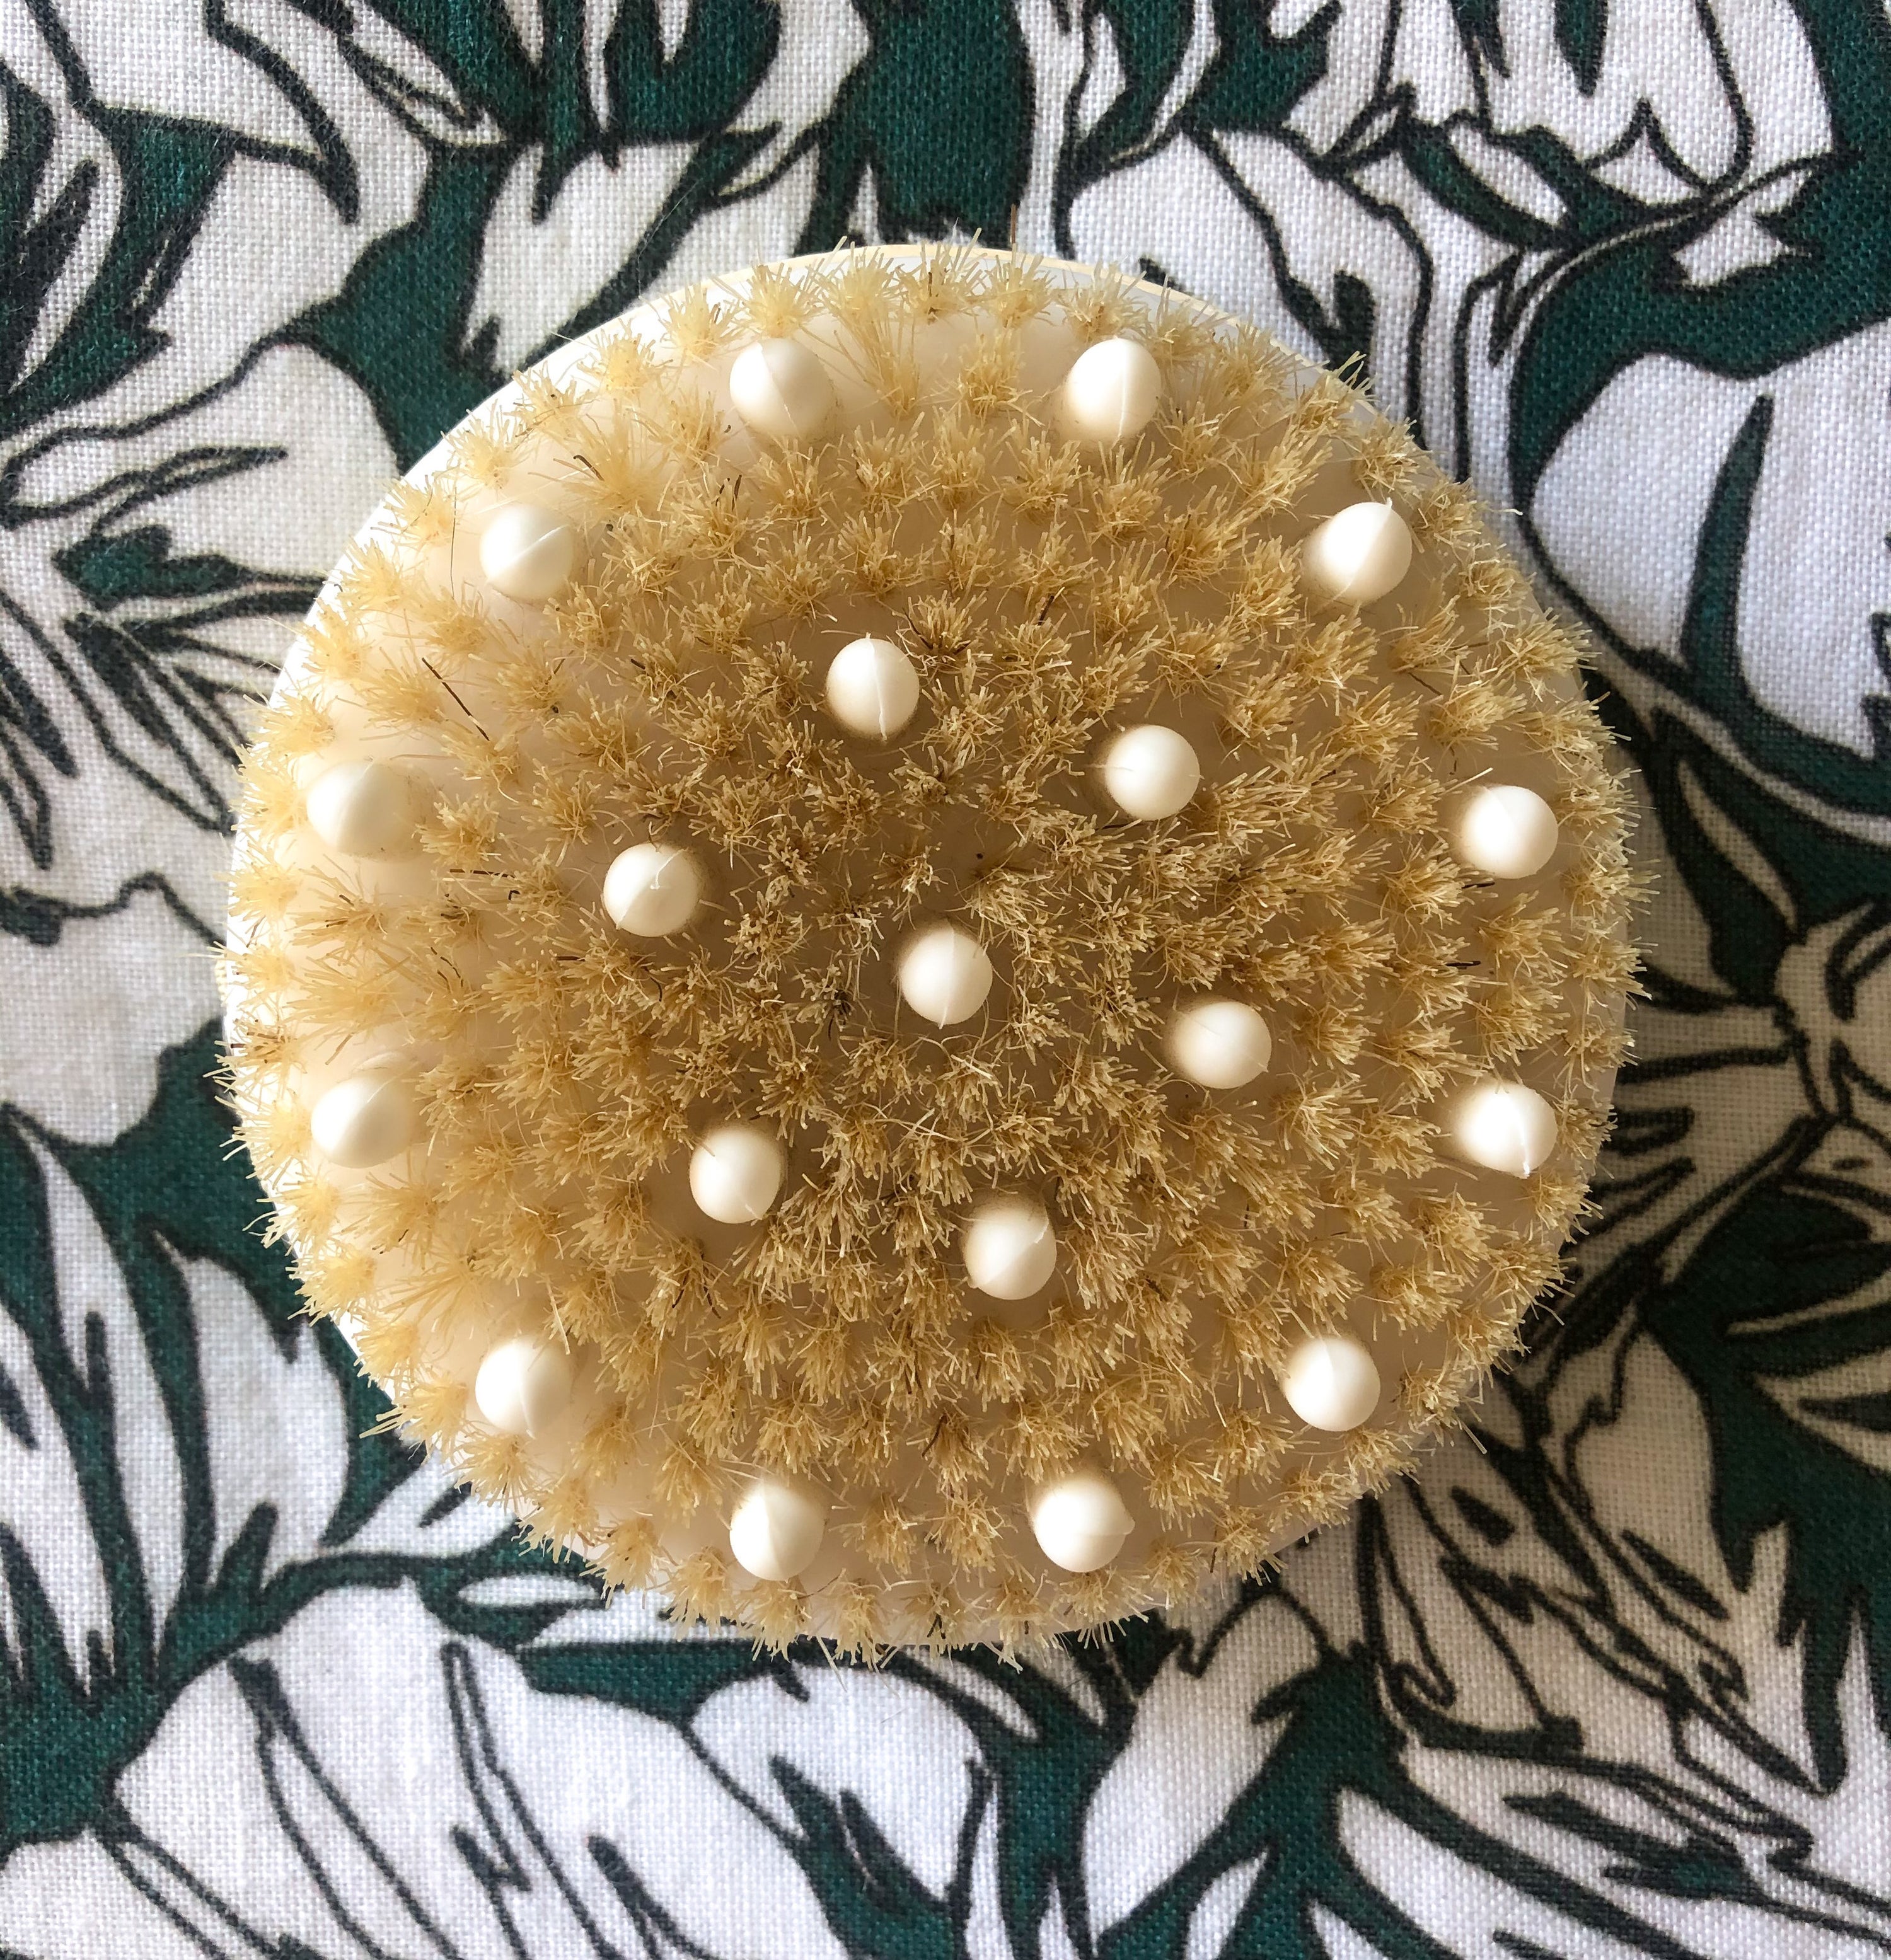 A flatlay of the body rush with rubber nodes on a patterned fabric